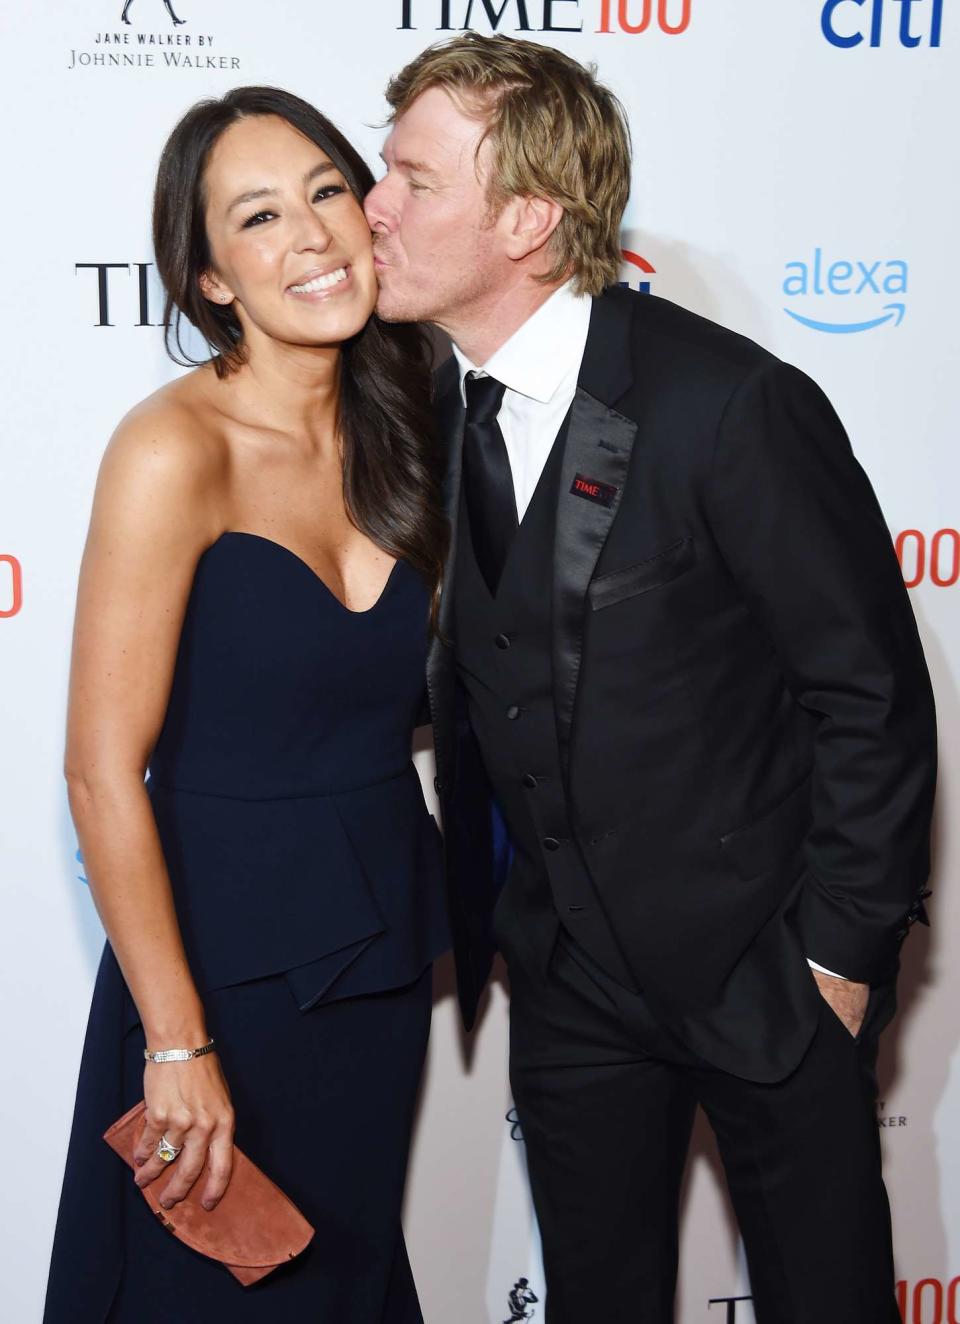 Joanna Gaines and Chip Gaines attend the TIME 100 Gala 2019 Cocktails at Jazz at Lincoln Center on April 23, 2019 in New York City